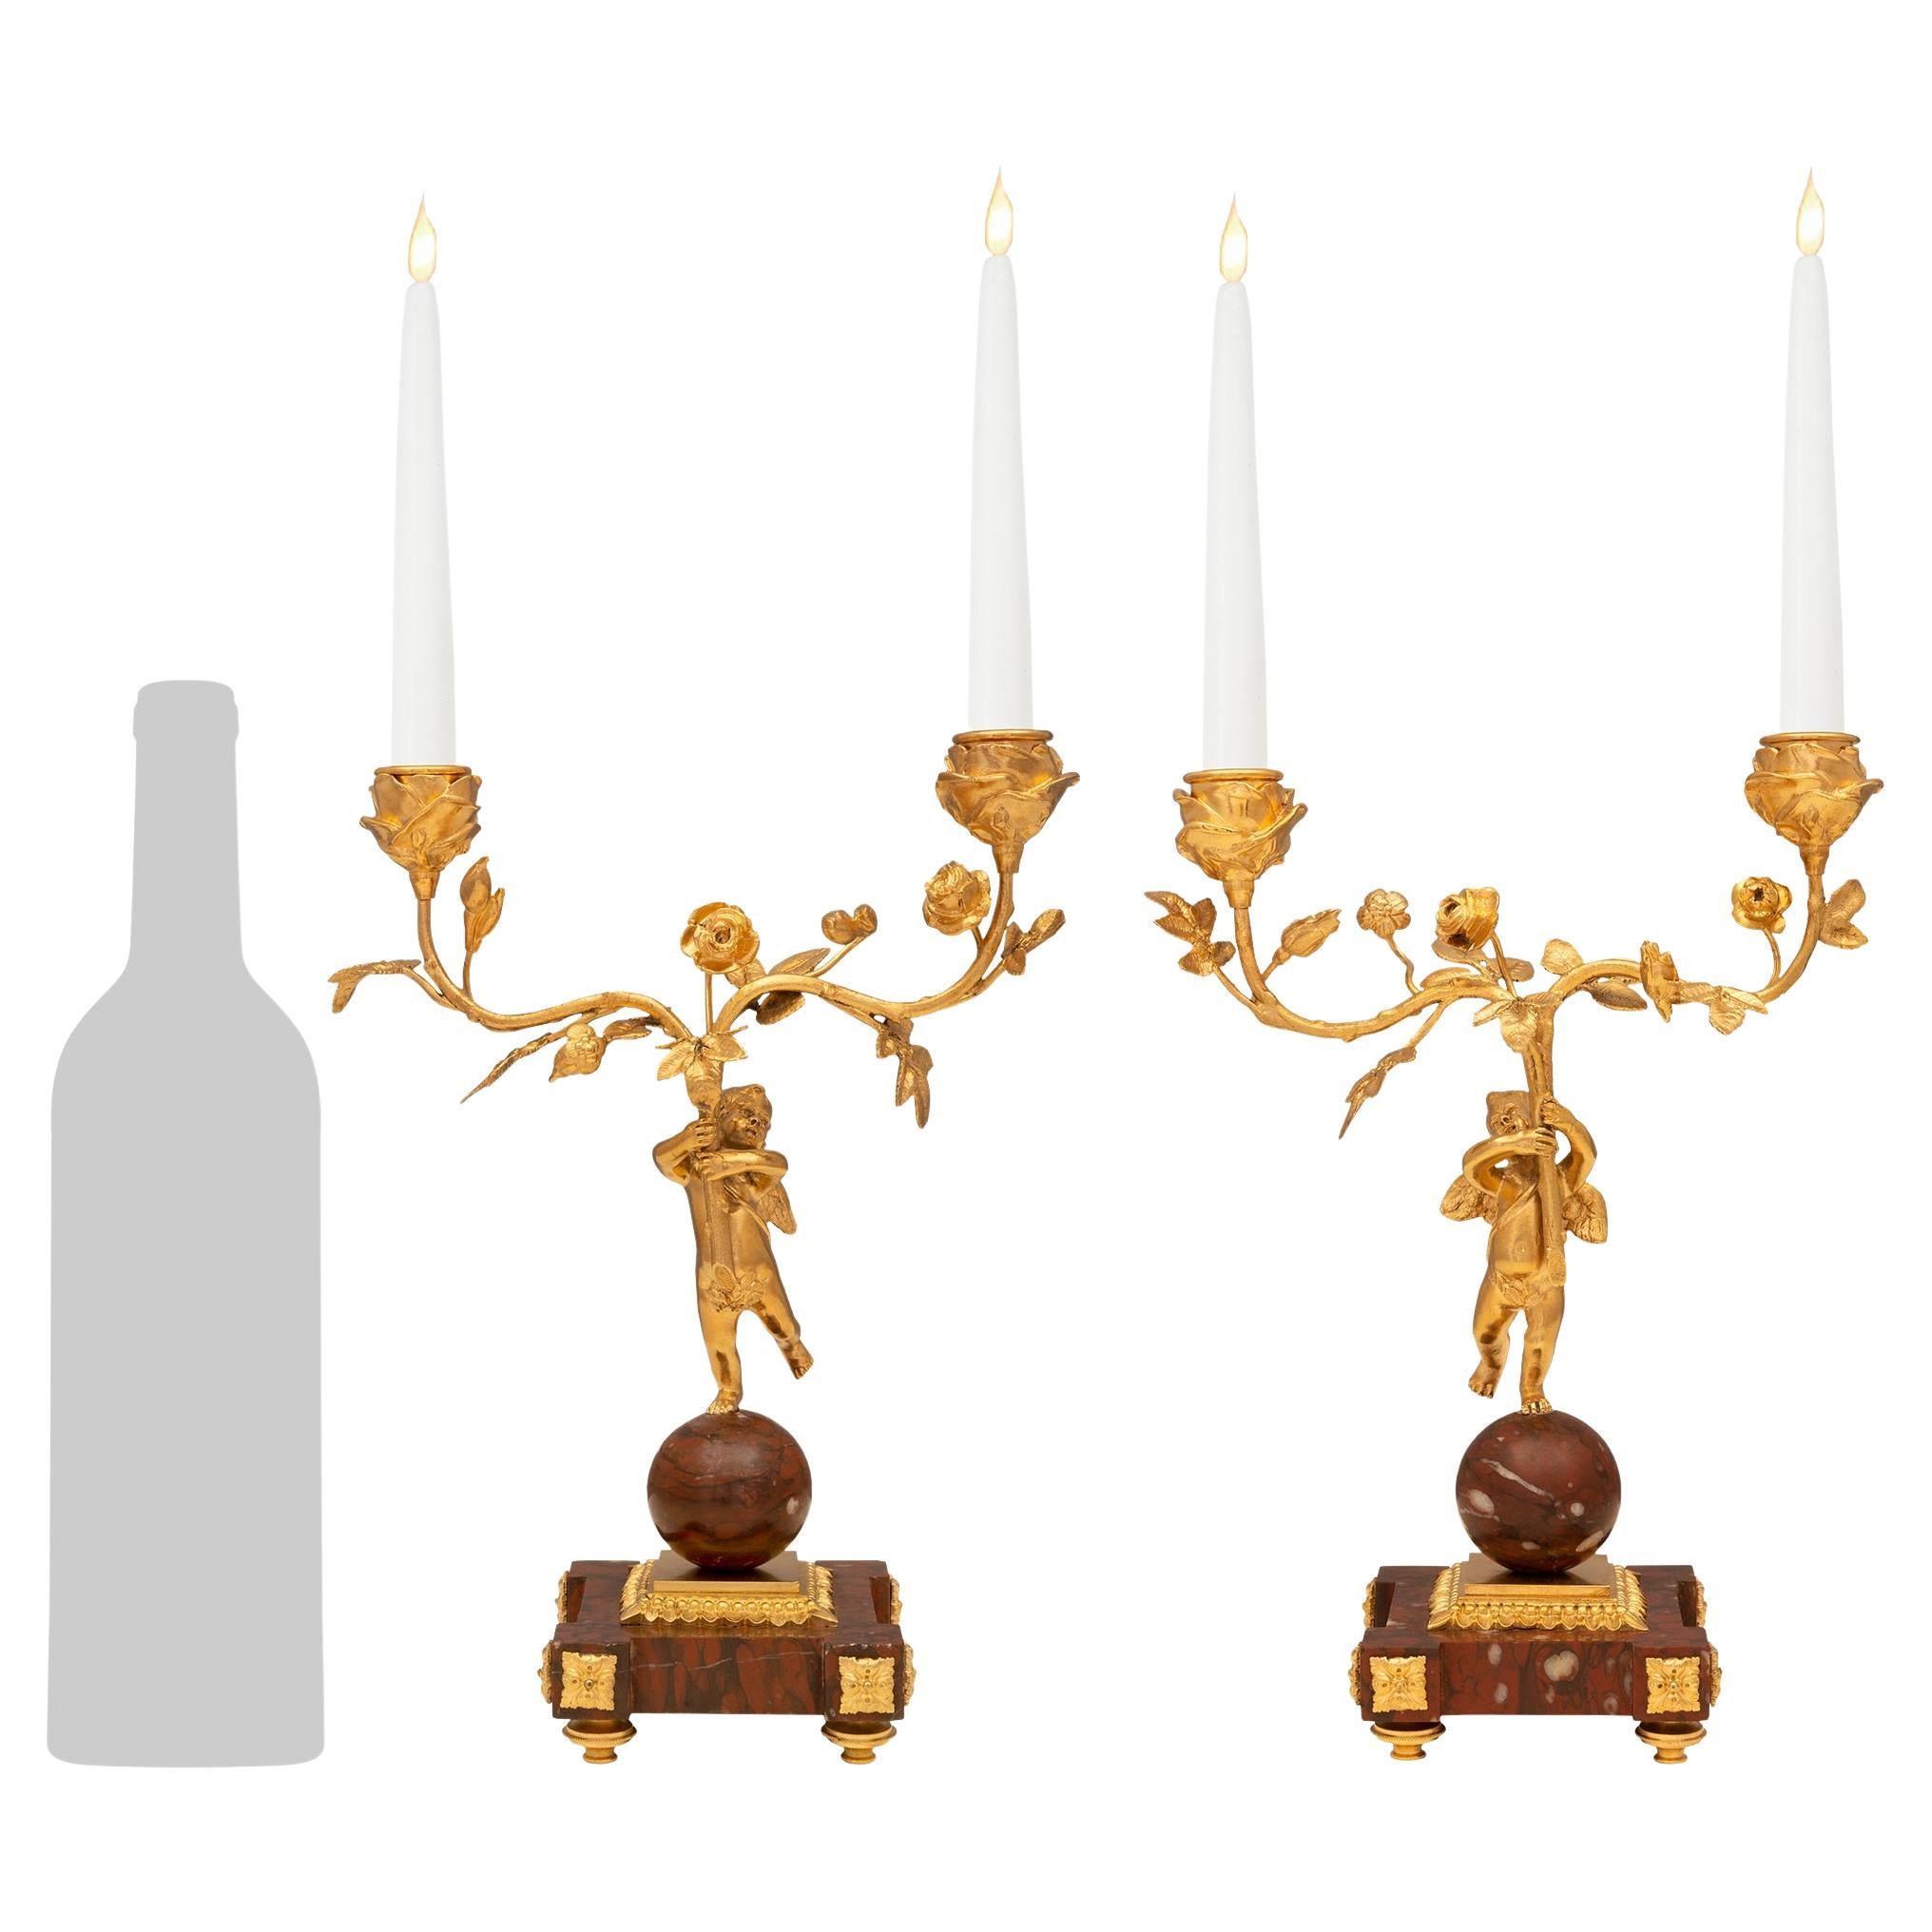 Pair of French 19th Century Elle Époque Period Ormolu and Marble Candelabras